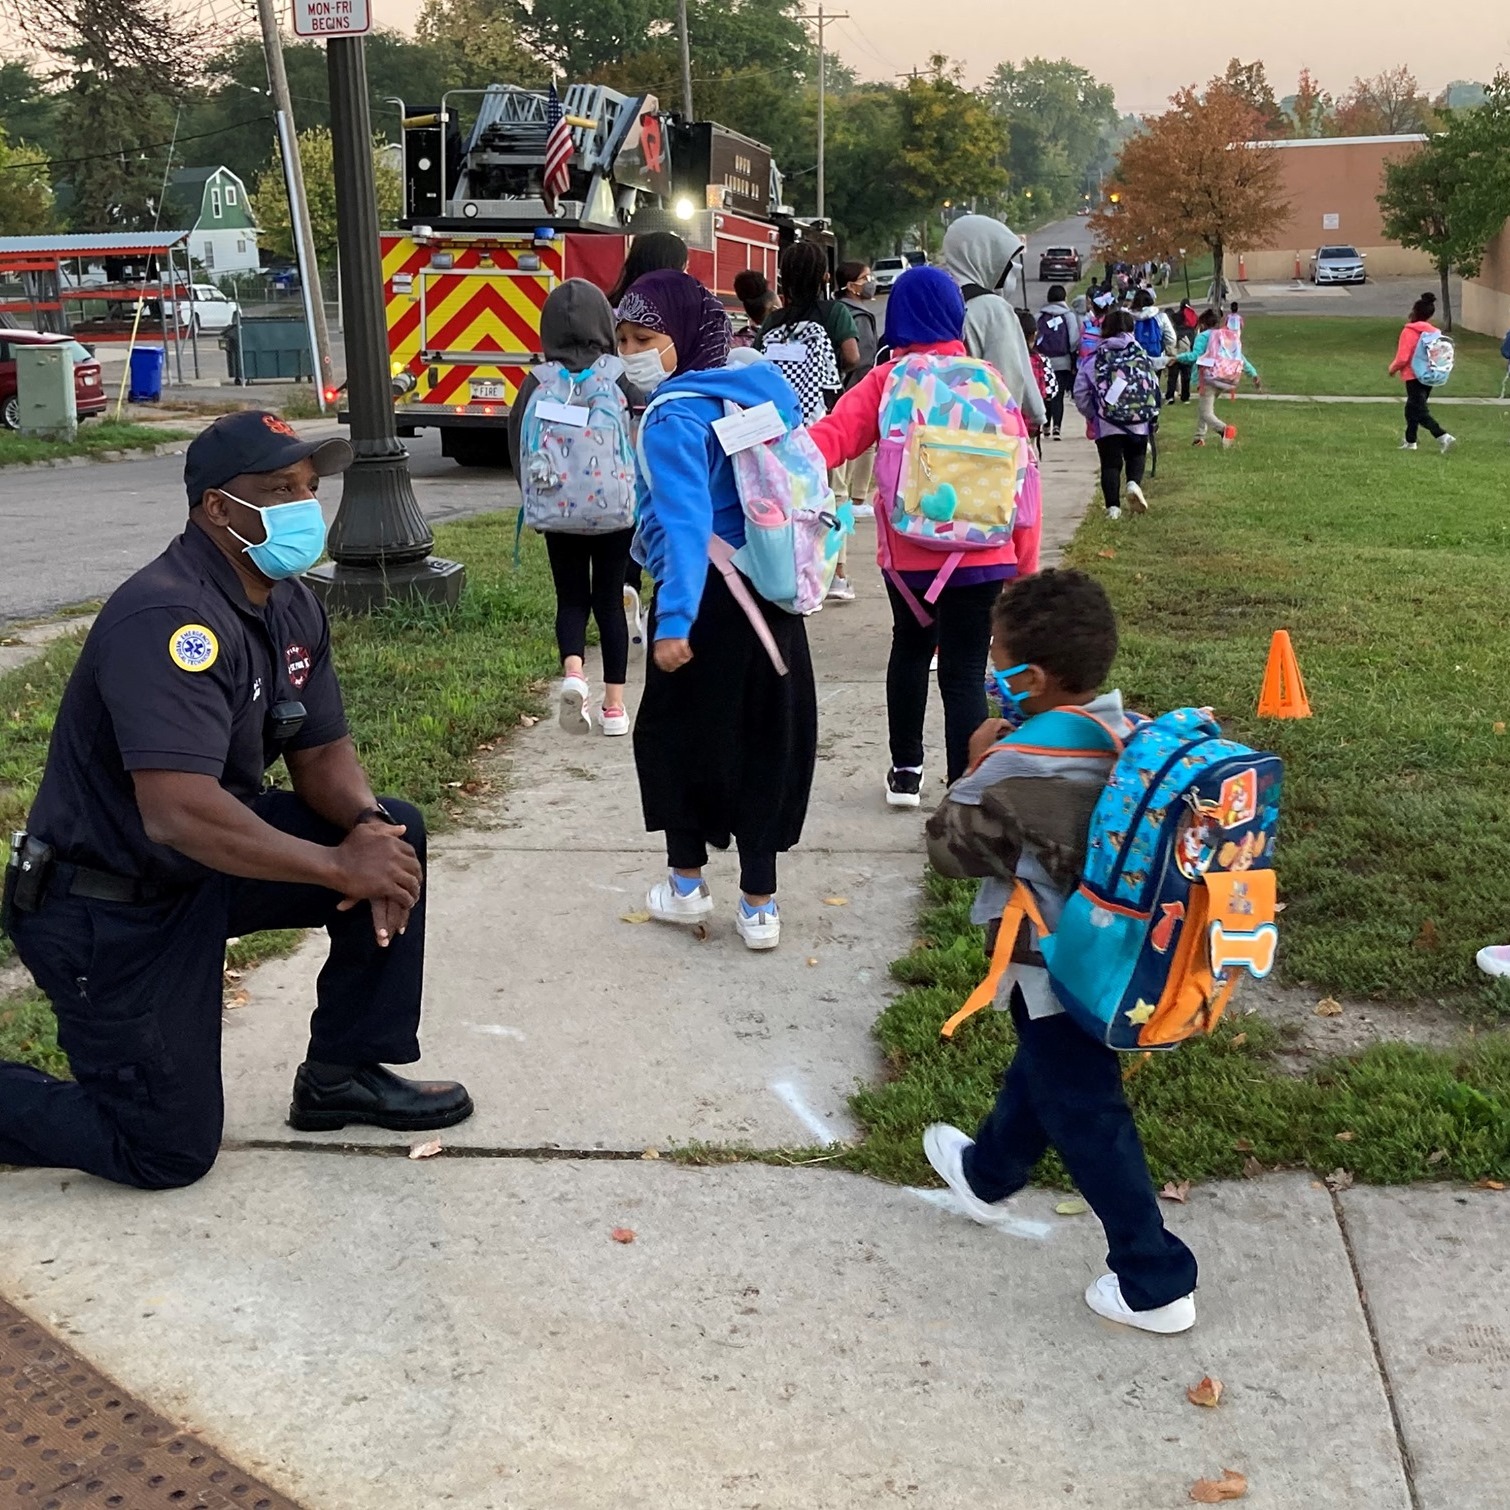 Photo: Children walking past a firefighter on their way to school.